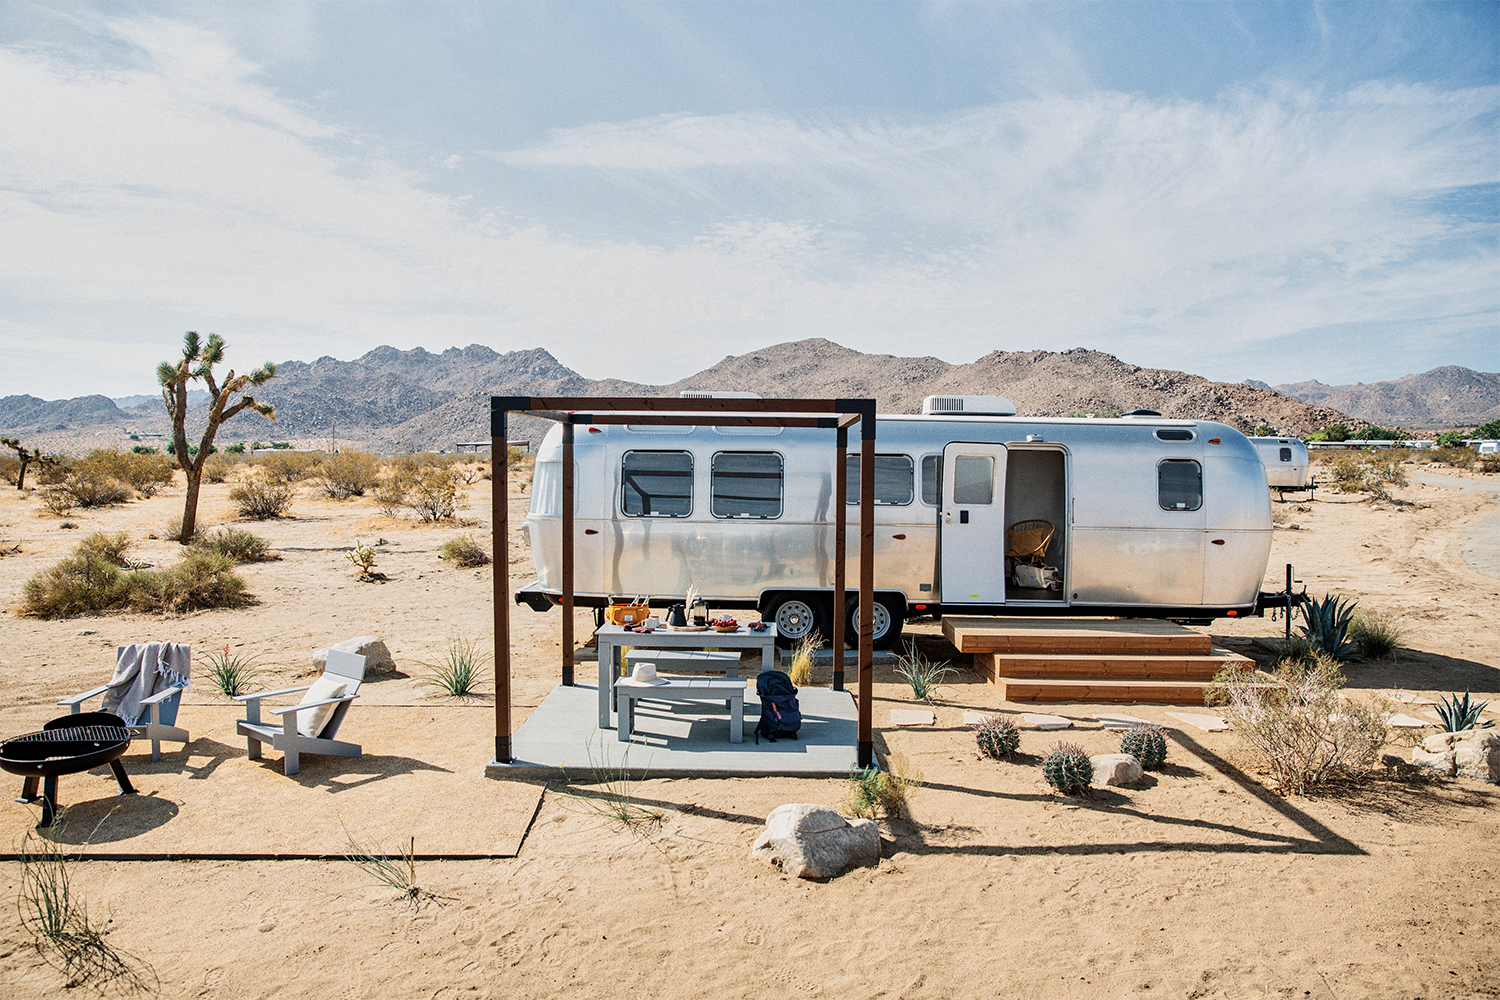 An Airstream trailer you can rent at AutoCamp Joshua Tree, one of the best places to book for fall travel